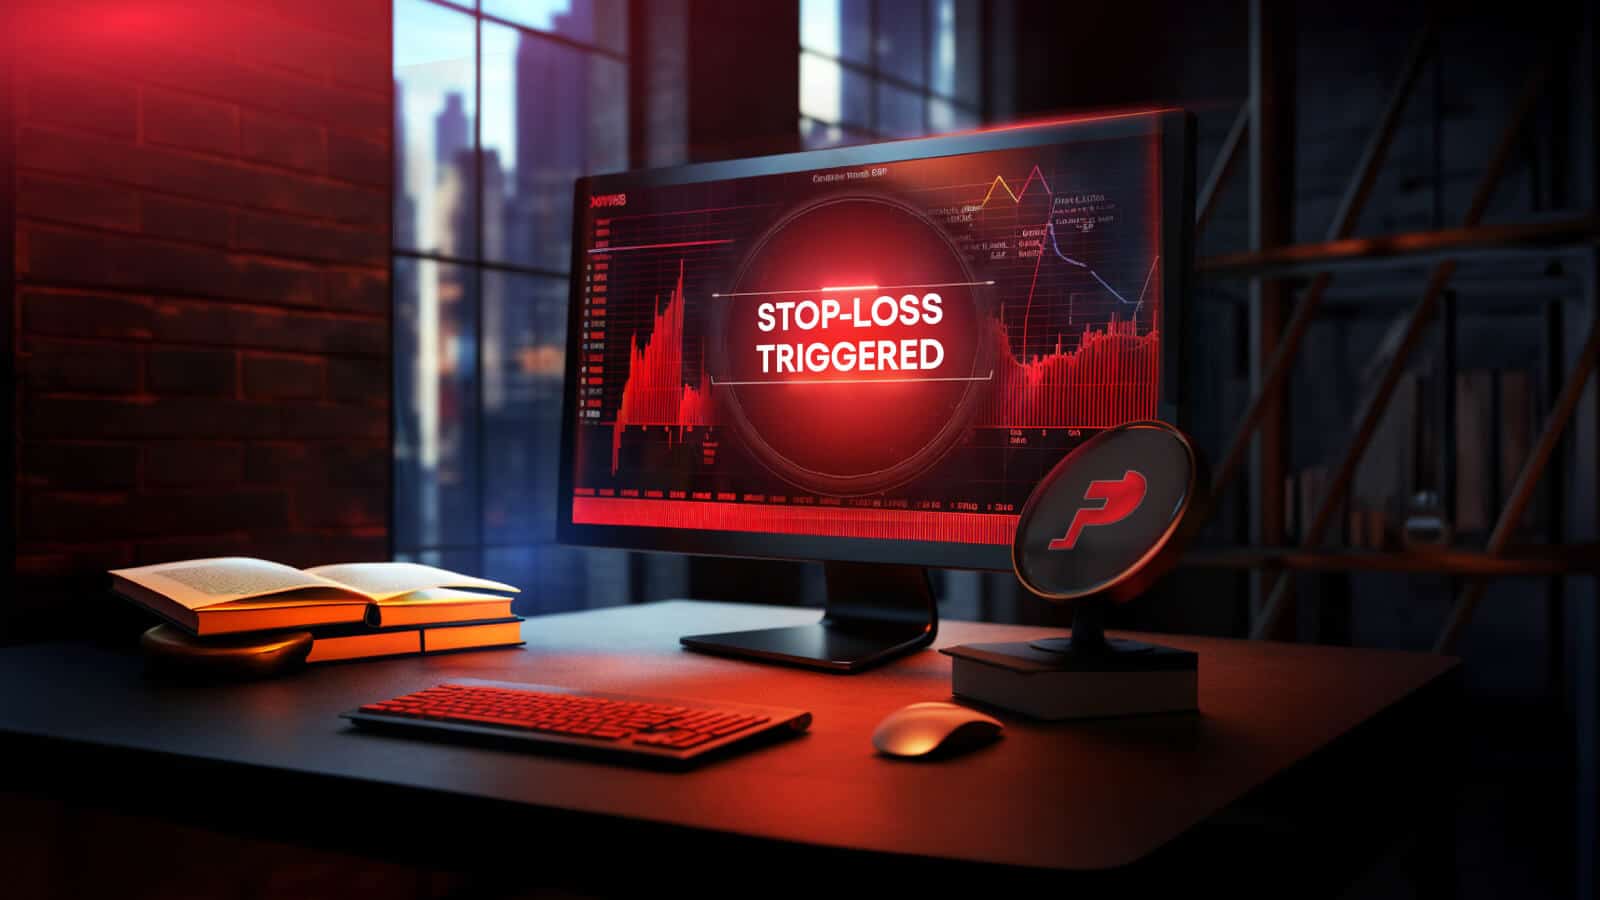 Futuristic trading platform with stop loss order triggered